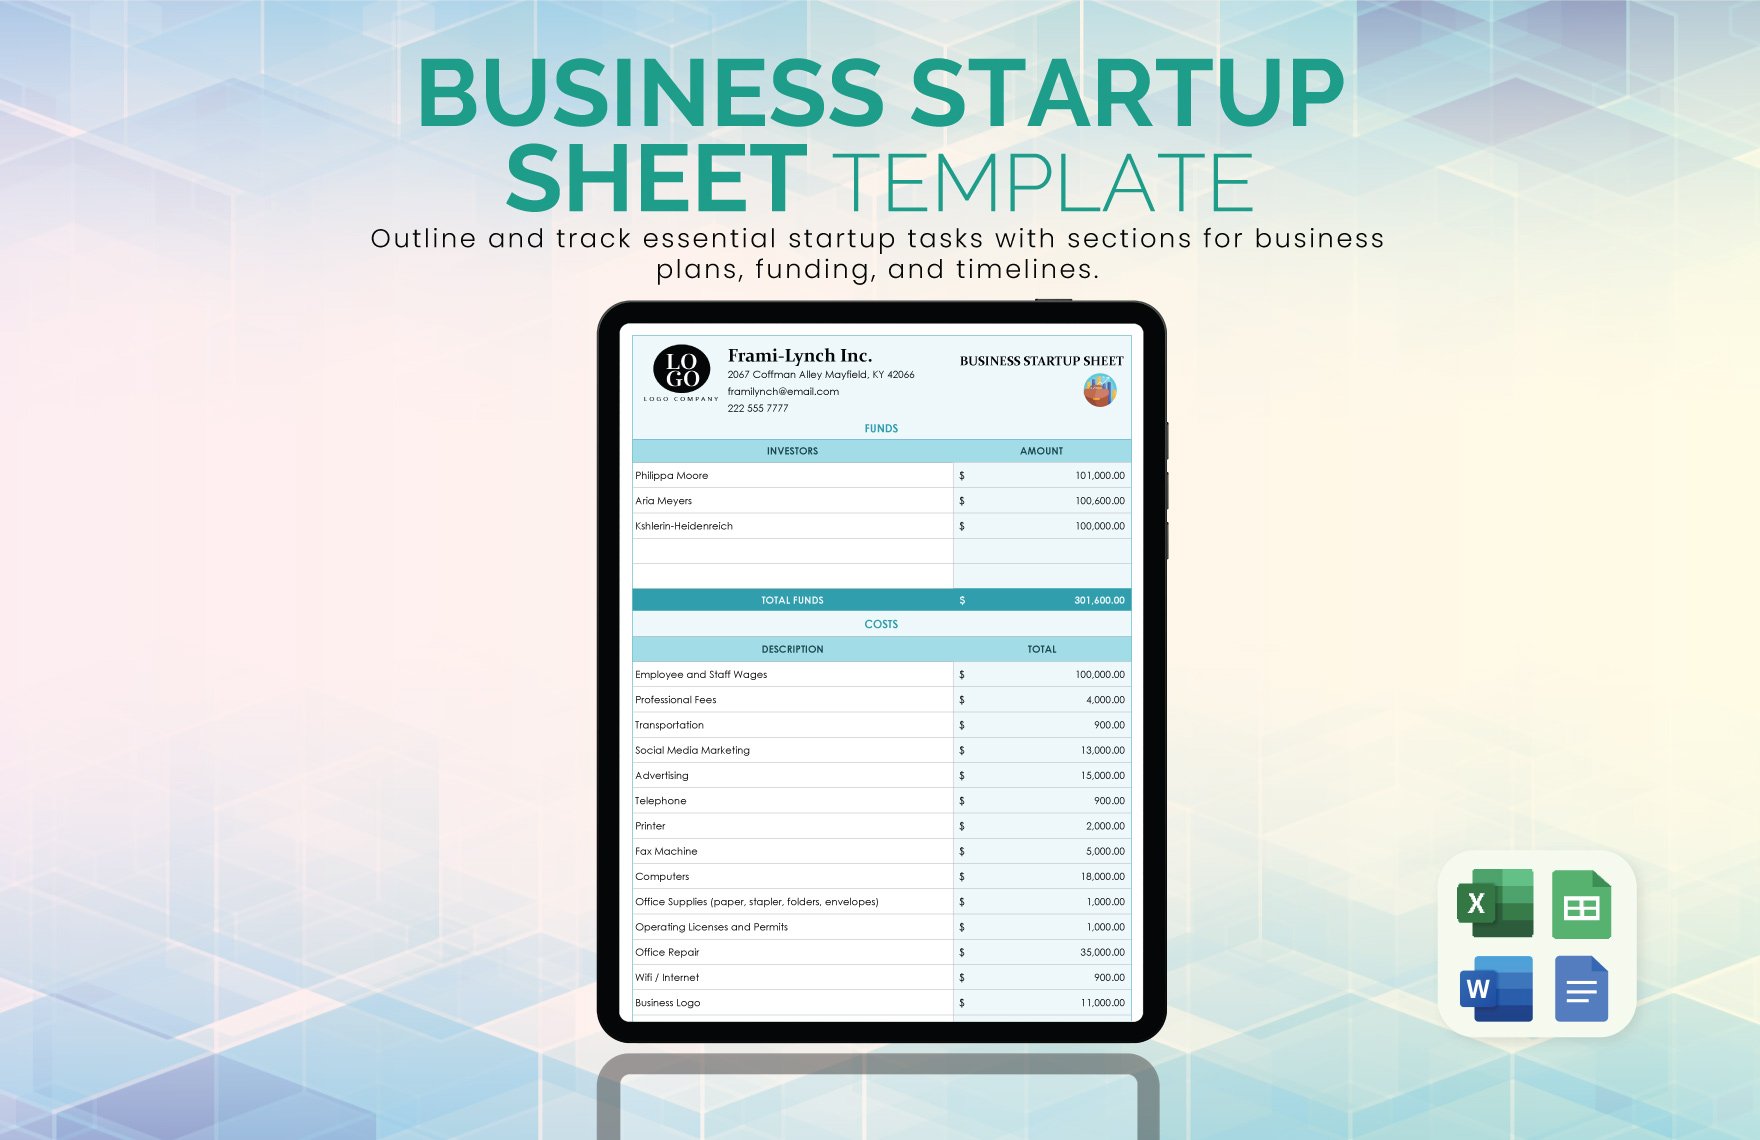 Free Business Startup Sheet Template in Word, Google Docs, Excel, Google Sheets